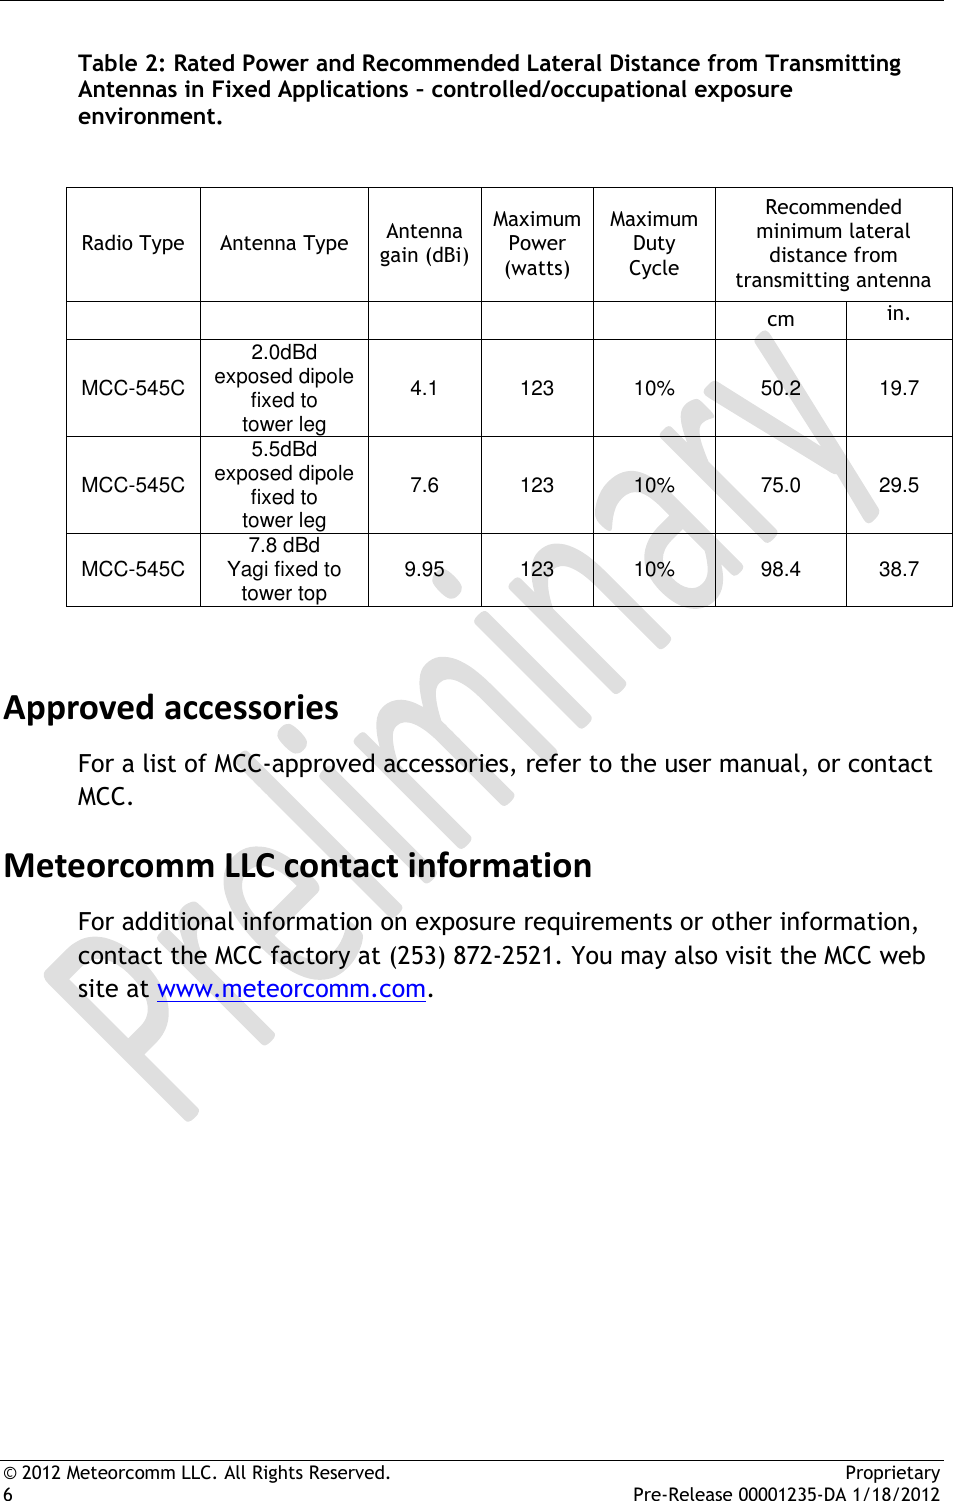  © 2012 Meteorcomm LLC. All Rights Reserved.    Proprietary 6      Pre-Release 00001235-DA 1/18/2012 Table 2: Rated Power and Recommended Lateral Distance from Transmitting Antennas in Fixed Applications – controlled/occupational exposure environment.   Radio Type Antenna Type Antenna gain (dBi) Maximum Power (watts) Maximum Duty Cycle Recommended minimum lateral distance from transmitting antenna      cm  in. MCC-545C 2.0dBd exposed dipole fixed to     tower leg  4.1 123 10% 50.2 19.7 MCC-545C 5.5dBd exposed dipole fixed to     tower leg  7.6 123 10% 75.0 29.5 MCC-545C 7.8 dBd      Yagi fixed to     tower top 9.95 123 10% 98.4 38.7  Approved accessories For a list of MCC-approved accessories, refer to the user manual, or contact MCC. Meteorcomm LLC contact information For additional information on exposure requirements or other information, contact the MCC factory at (253) 872-2521. You may also visit the MCC web site at www.meteorcomm.com. 